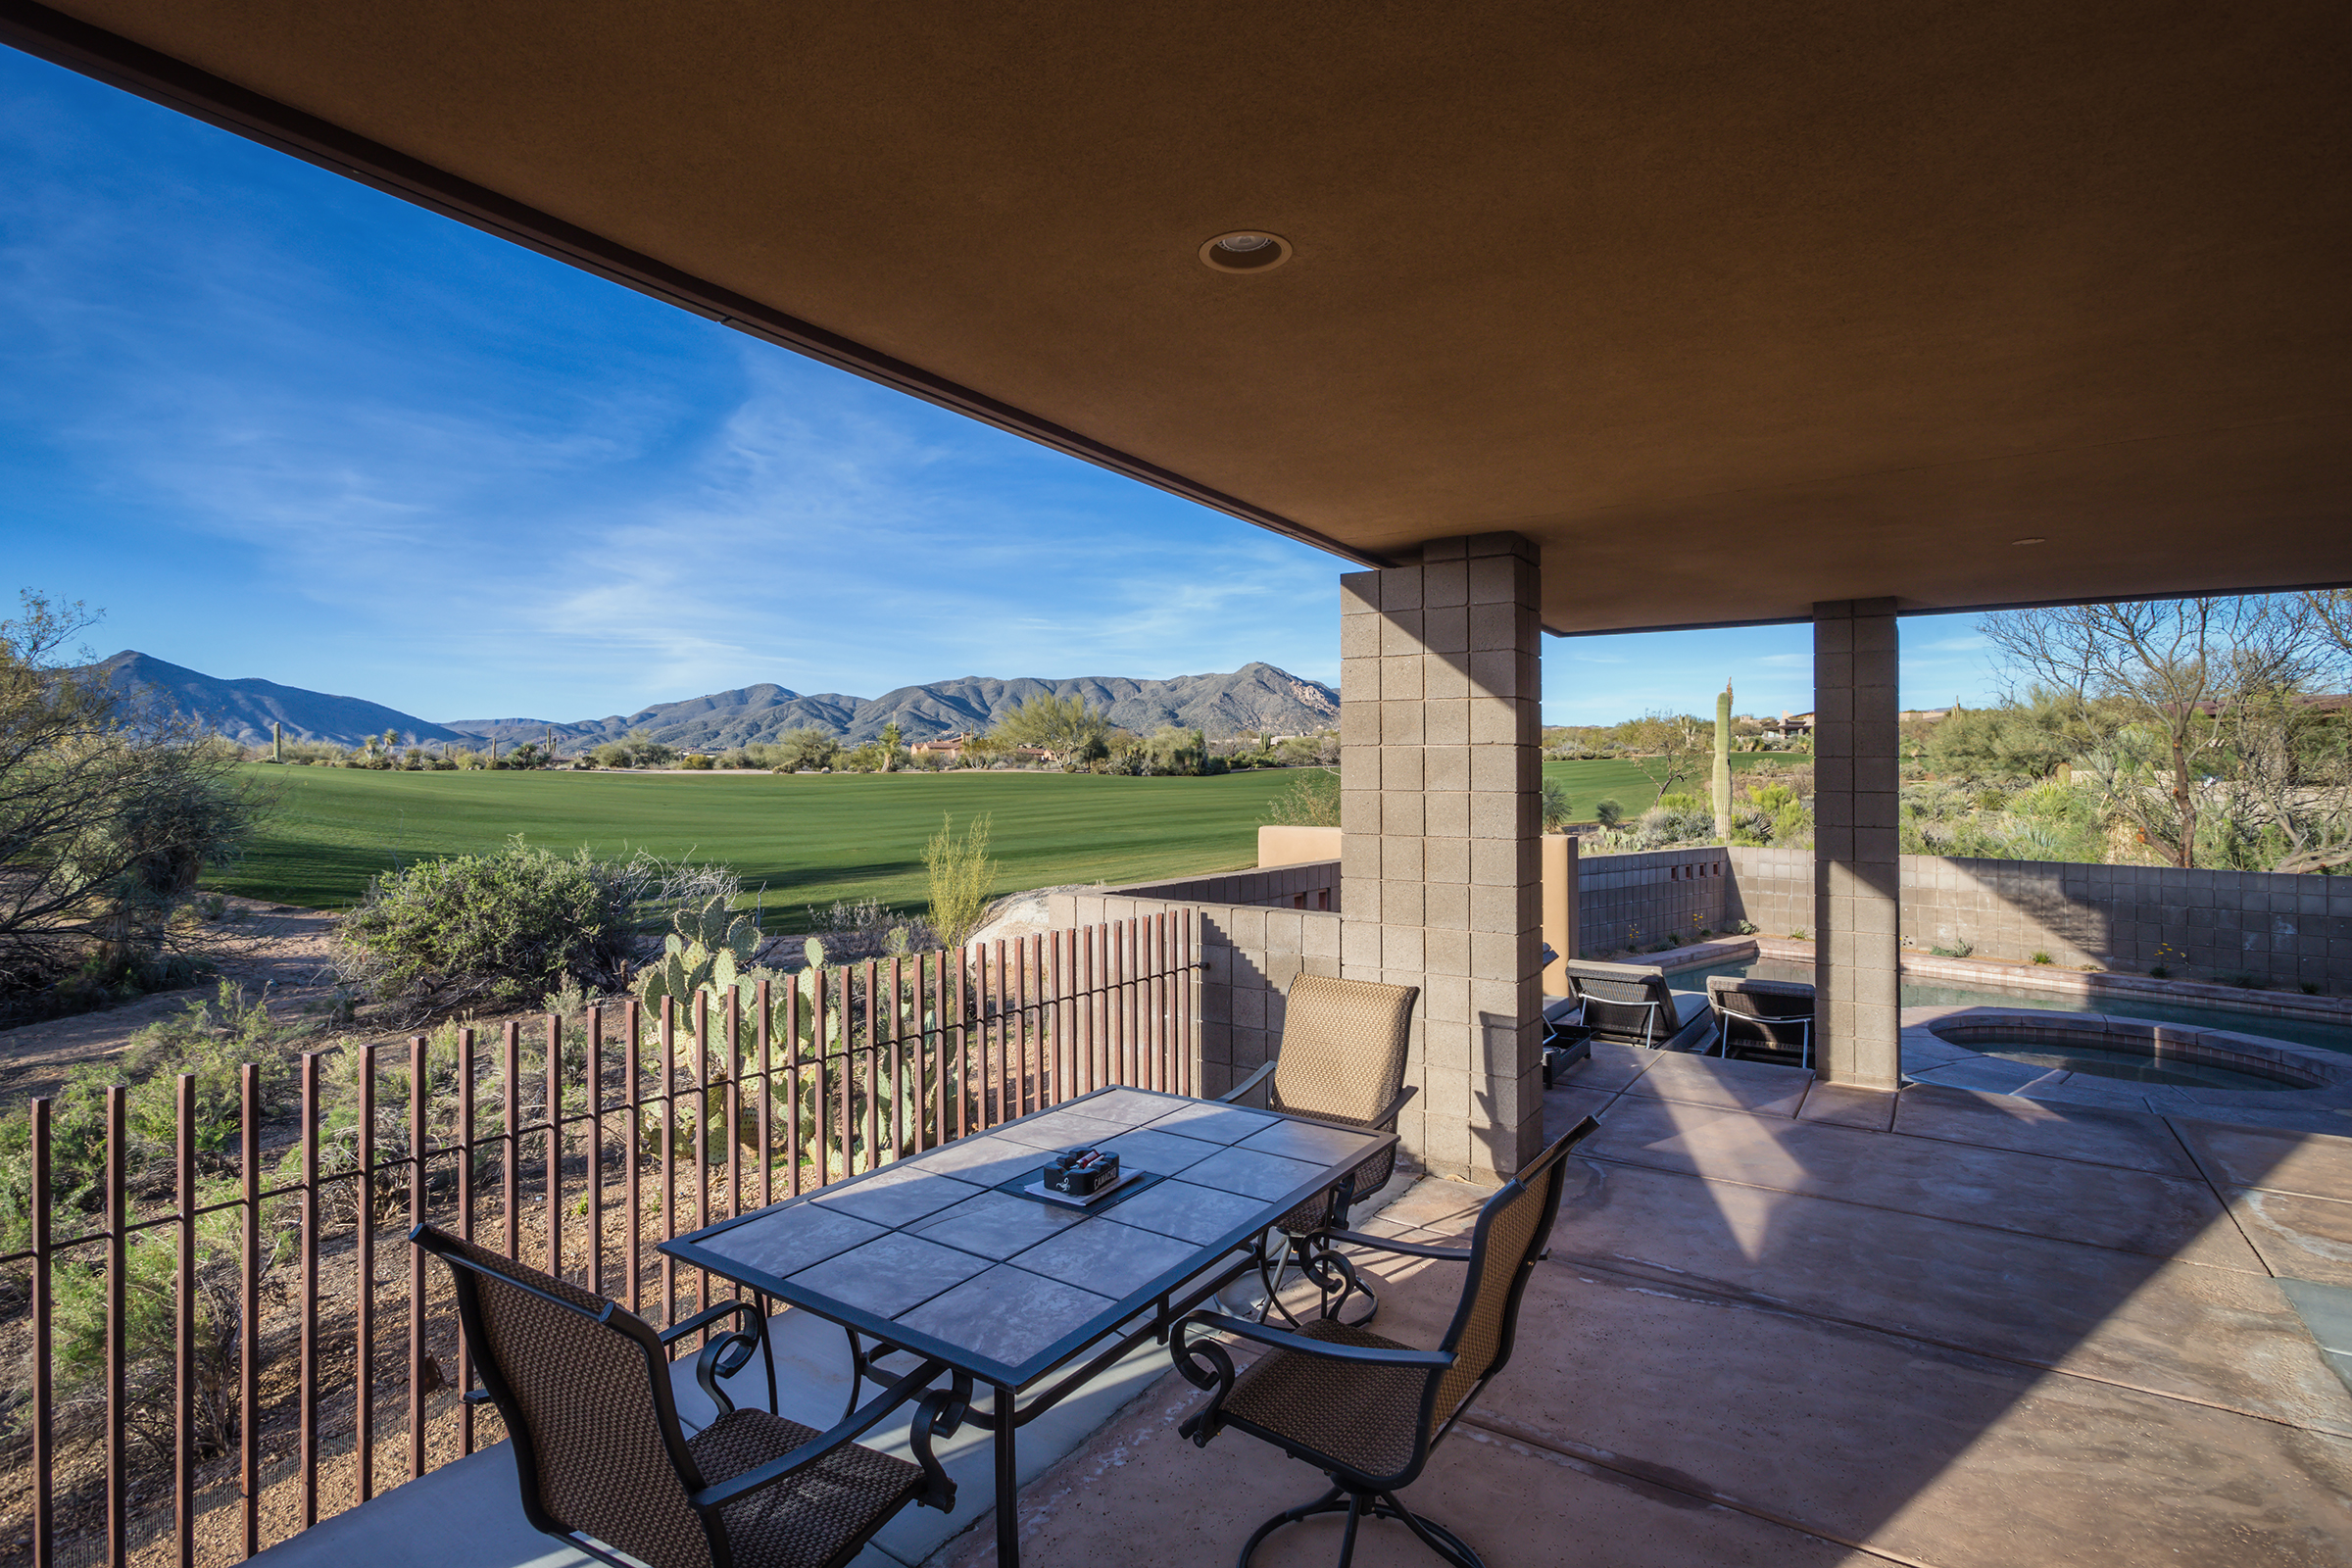 Scottsdale_home_patio_on_golf_course.jpg